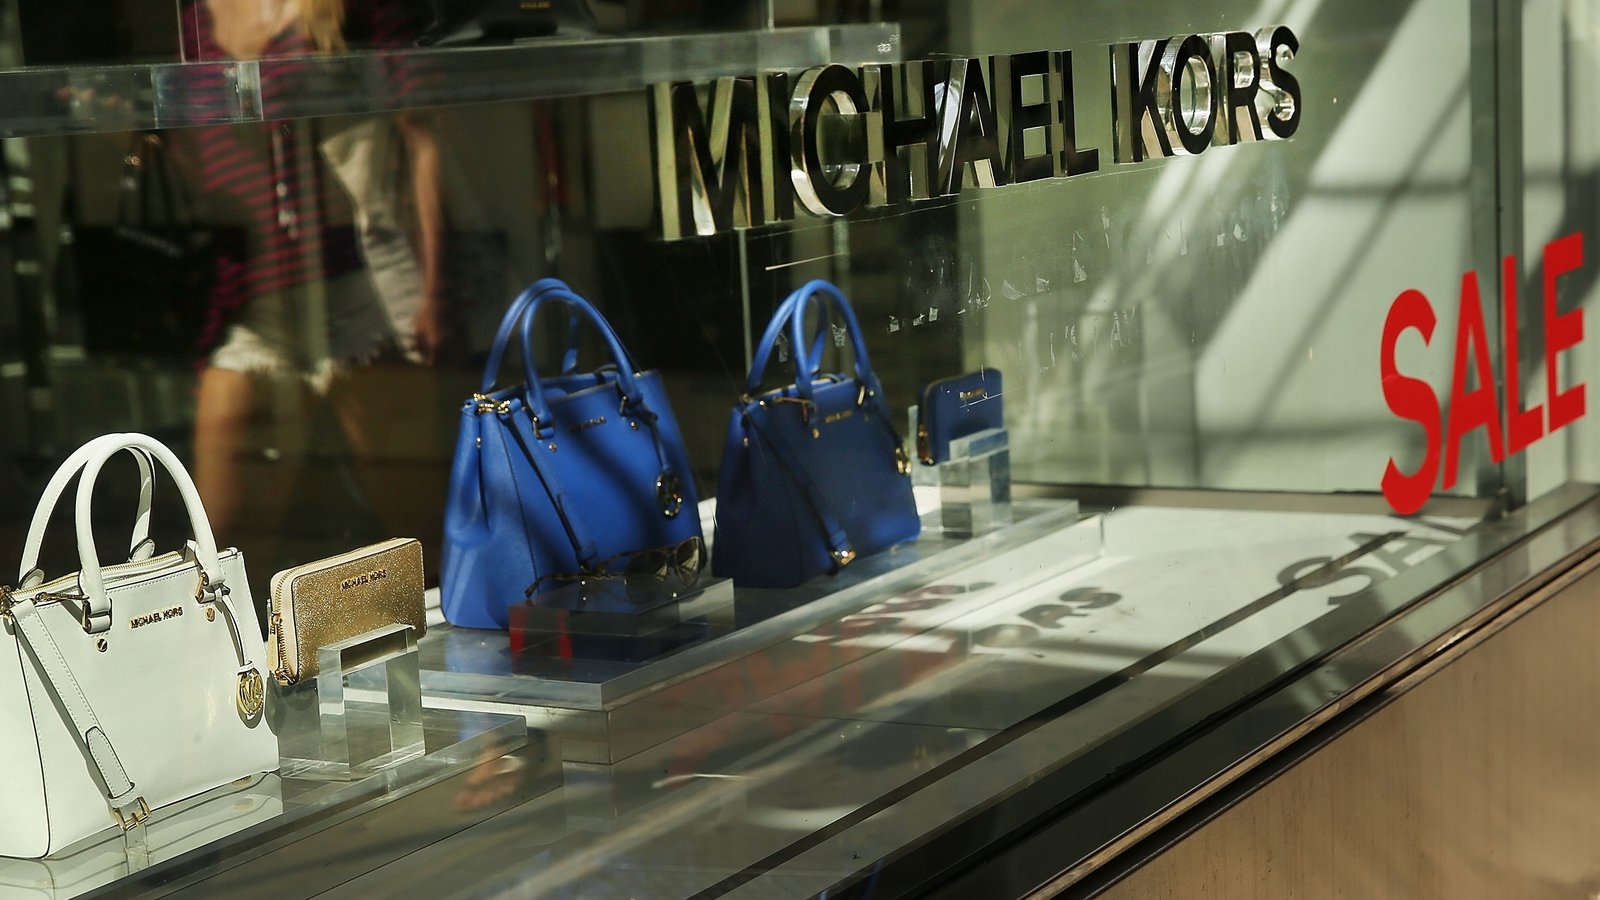 Coach Owner Tapestry Buys Versace Owner Capri Holdings for $8.5